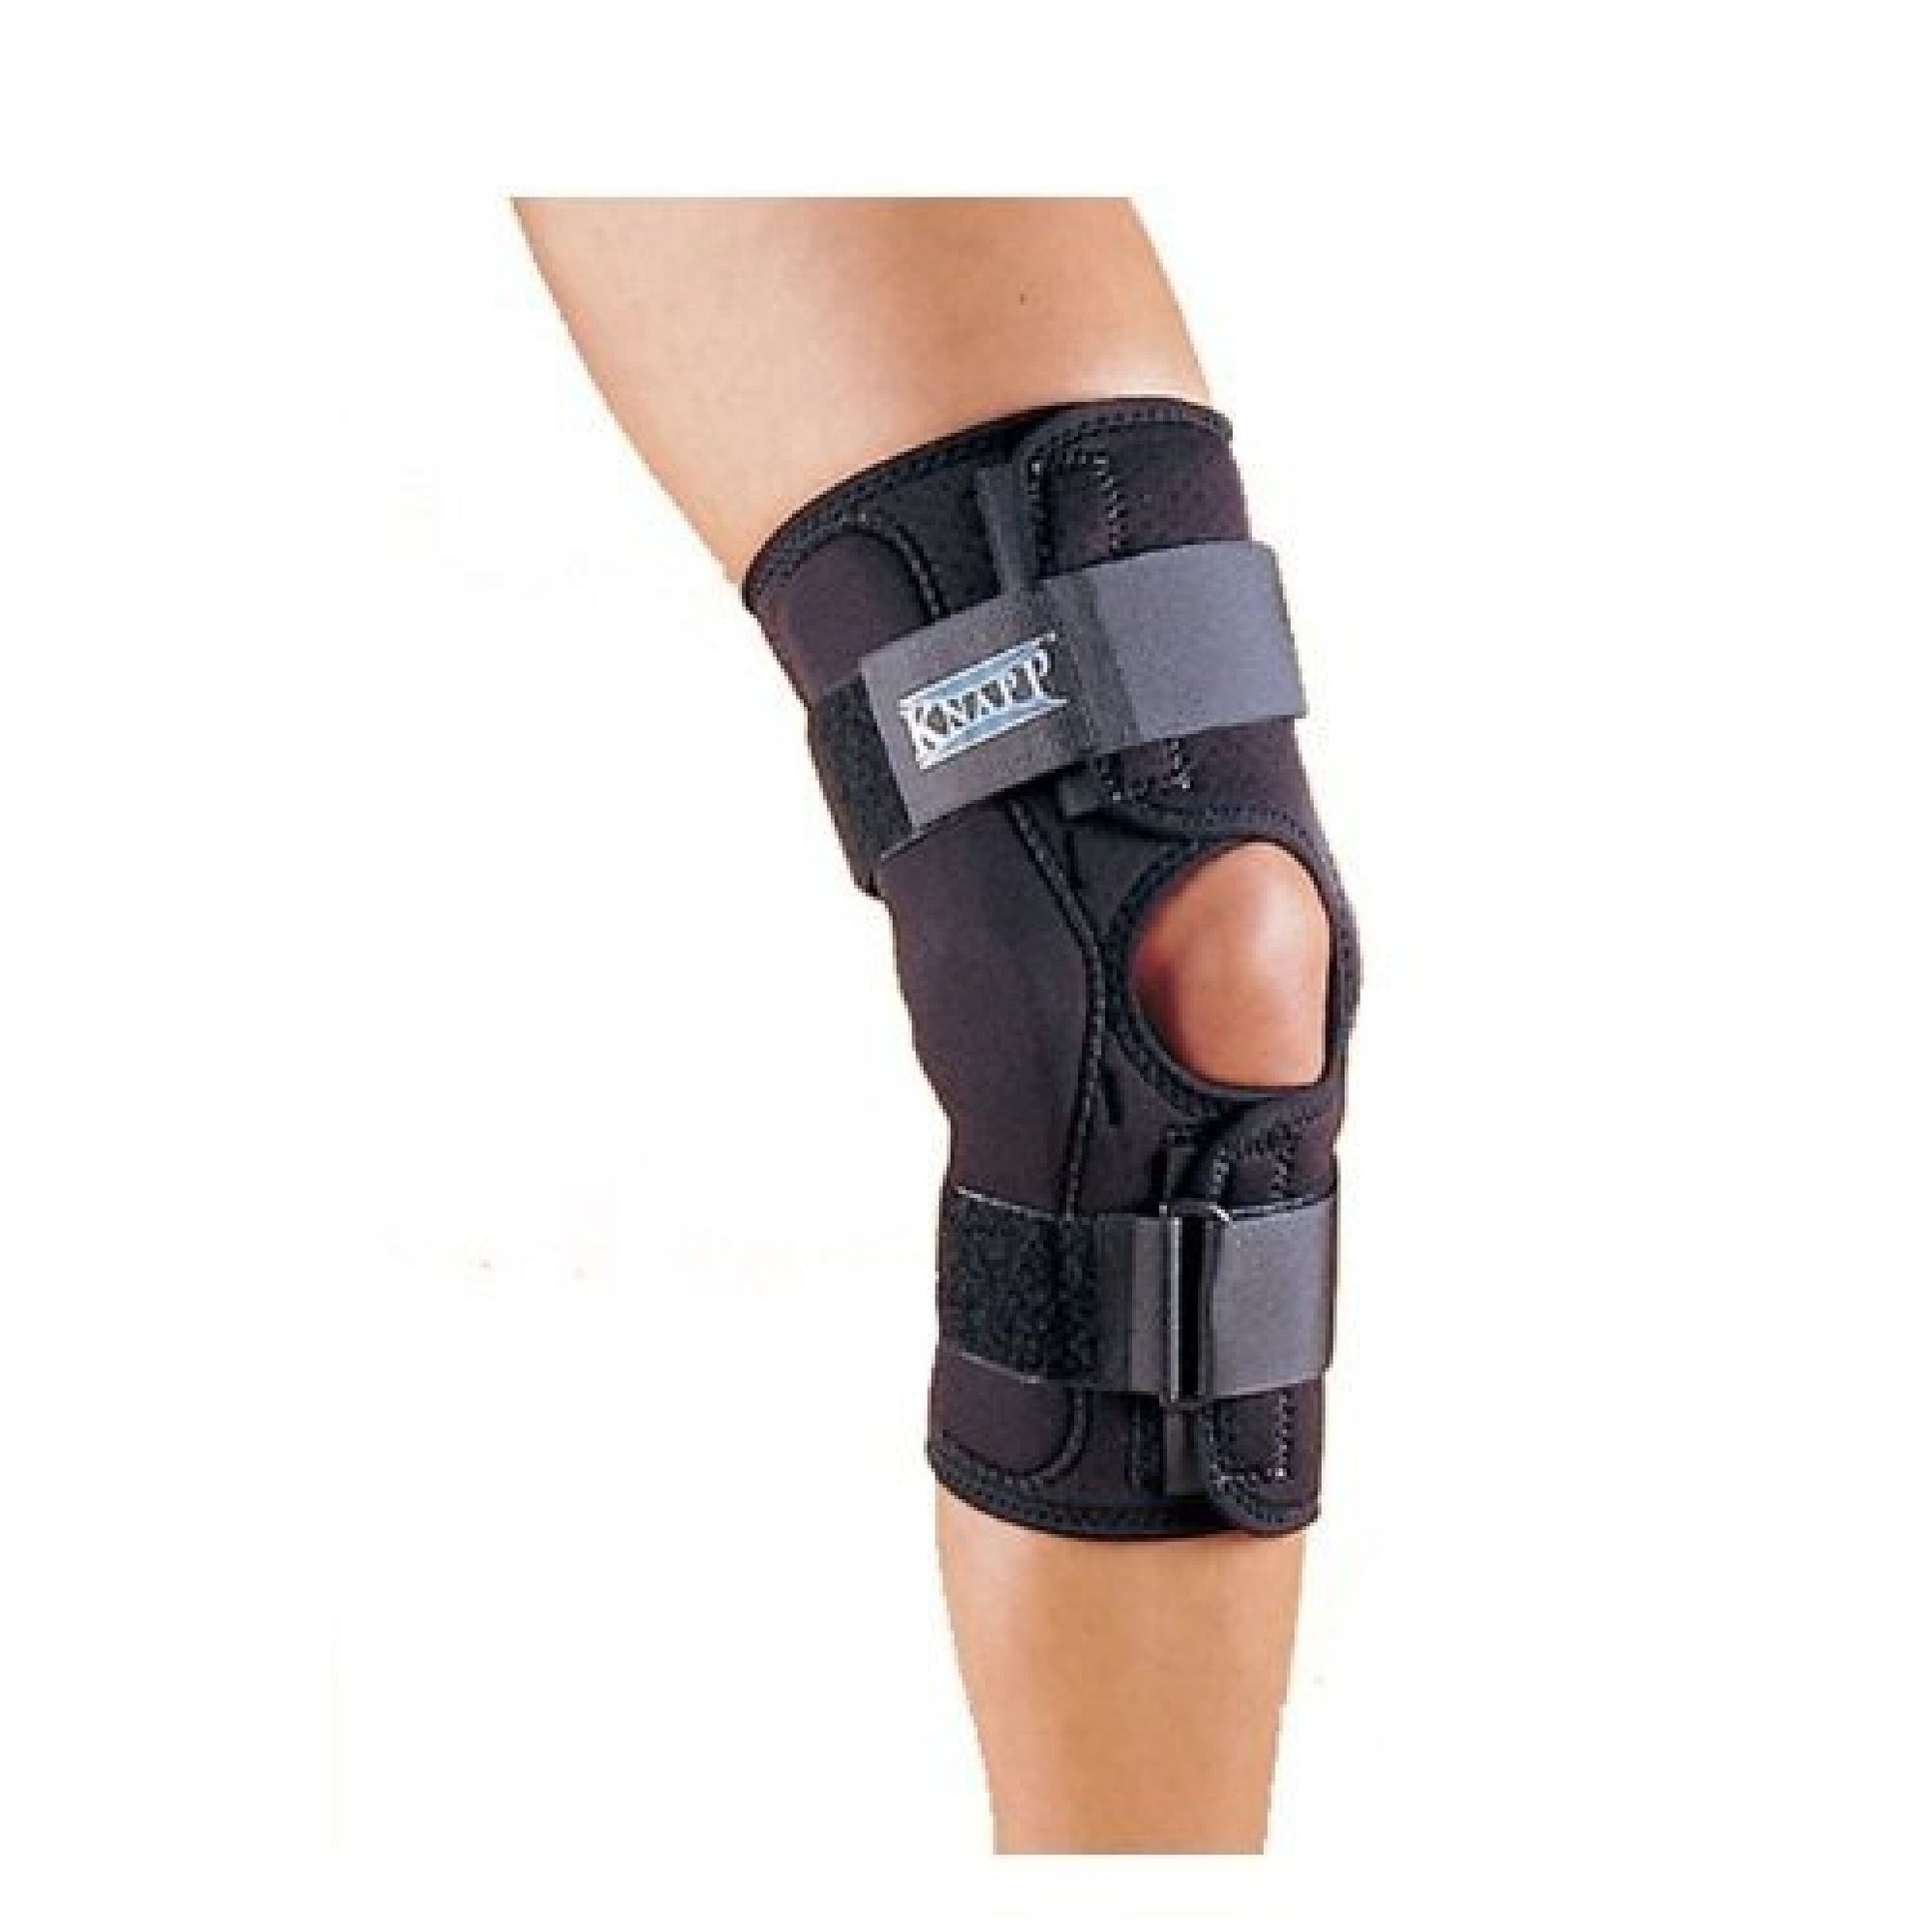 Patterson Medical Knapp Hinged Knee Brace | Great for an Unstable Knee ...